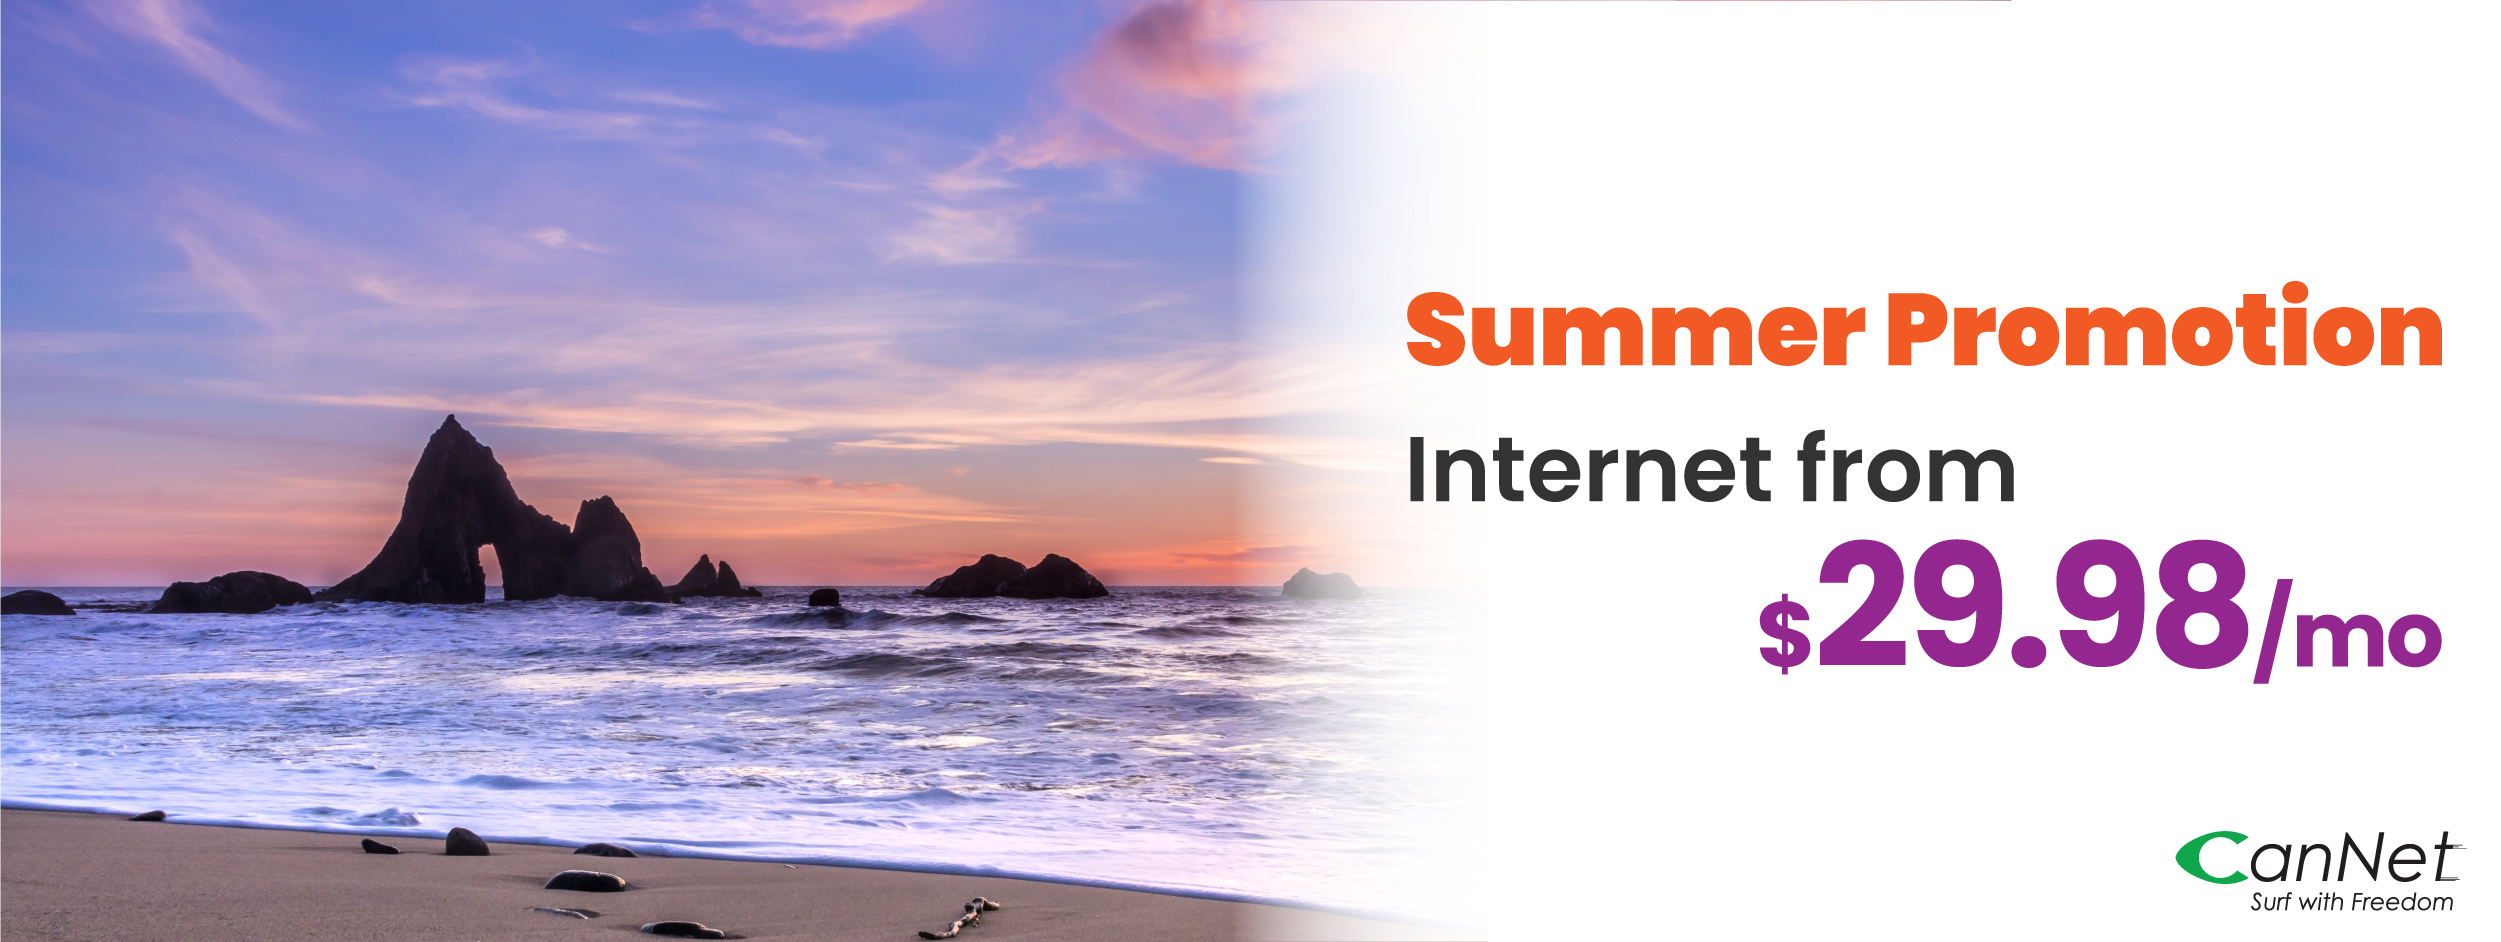 Summer Promotion Internet from $29.98/mo